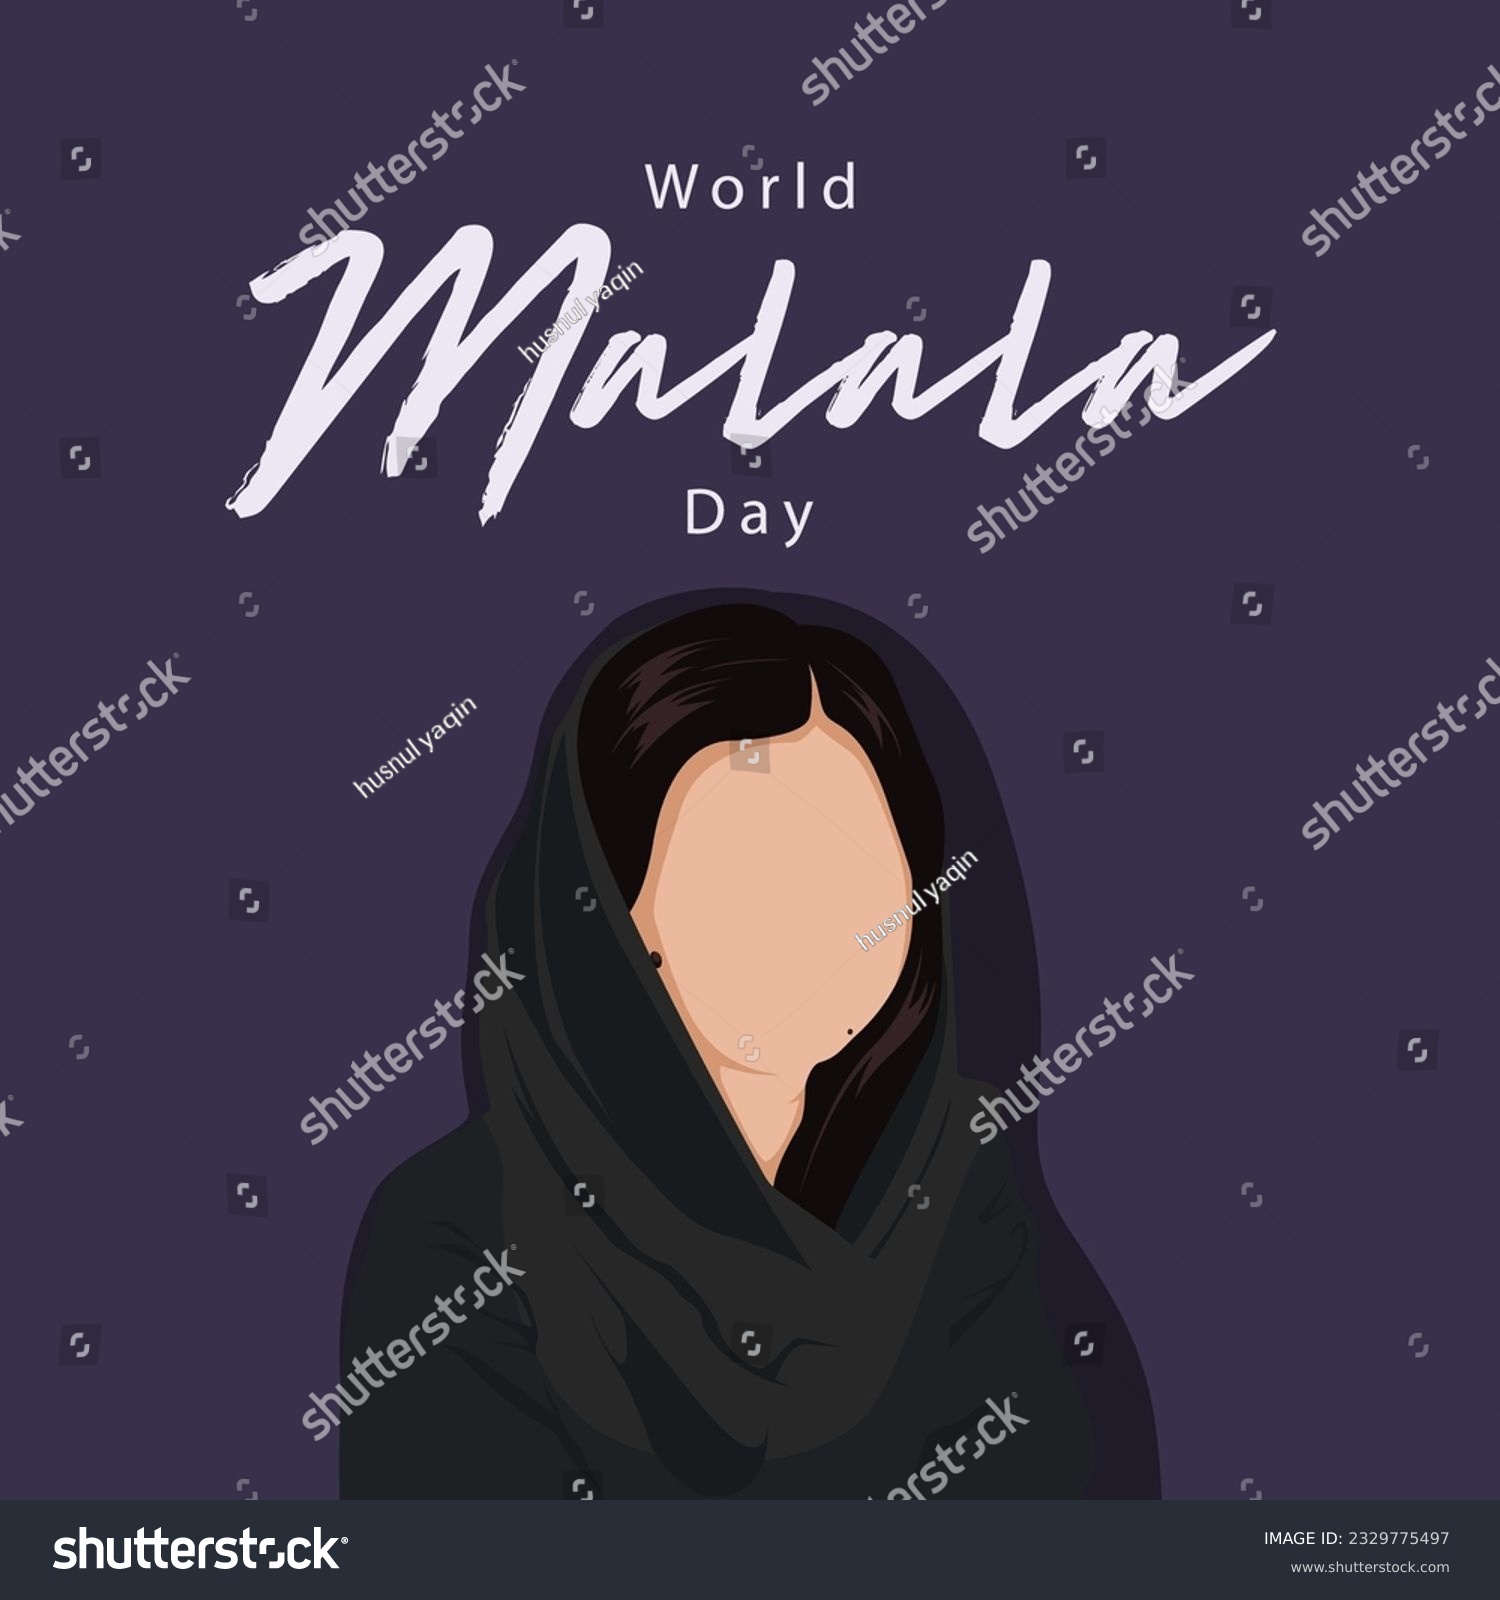 SVG of World malala day. Female face vector illustration. Celebrated every July 12th. Suitable for banners, greeting cards, social media, templates etc svg